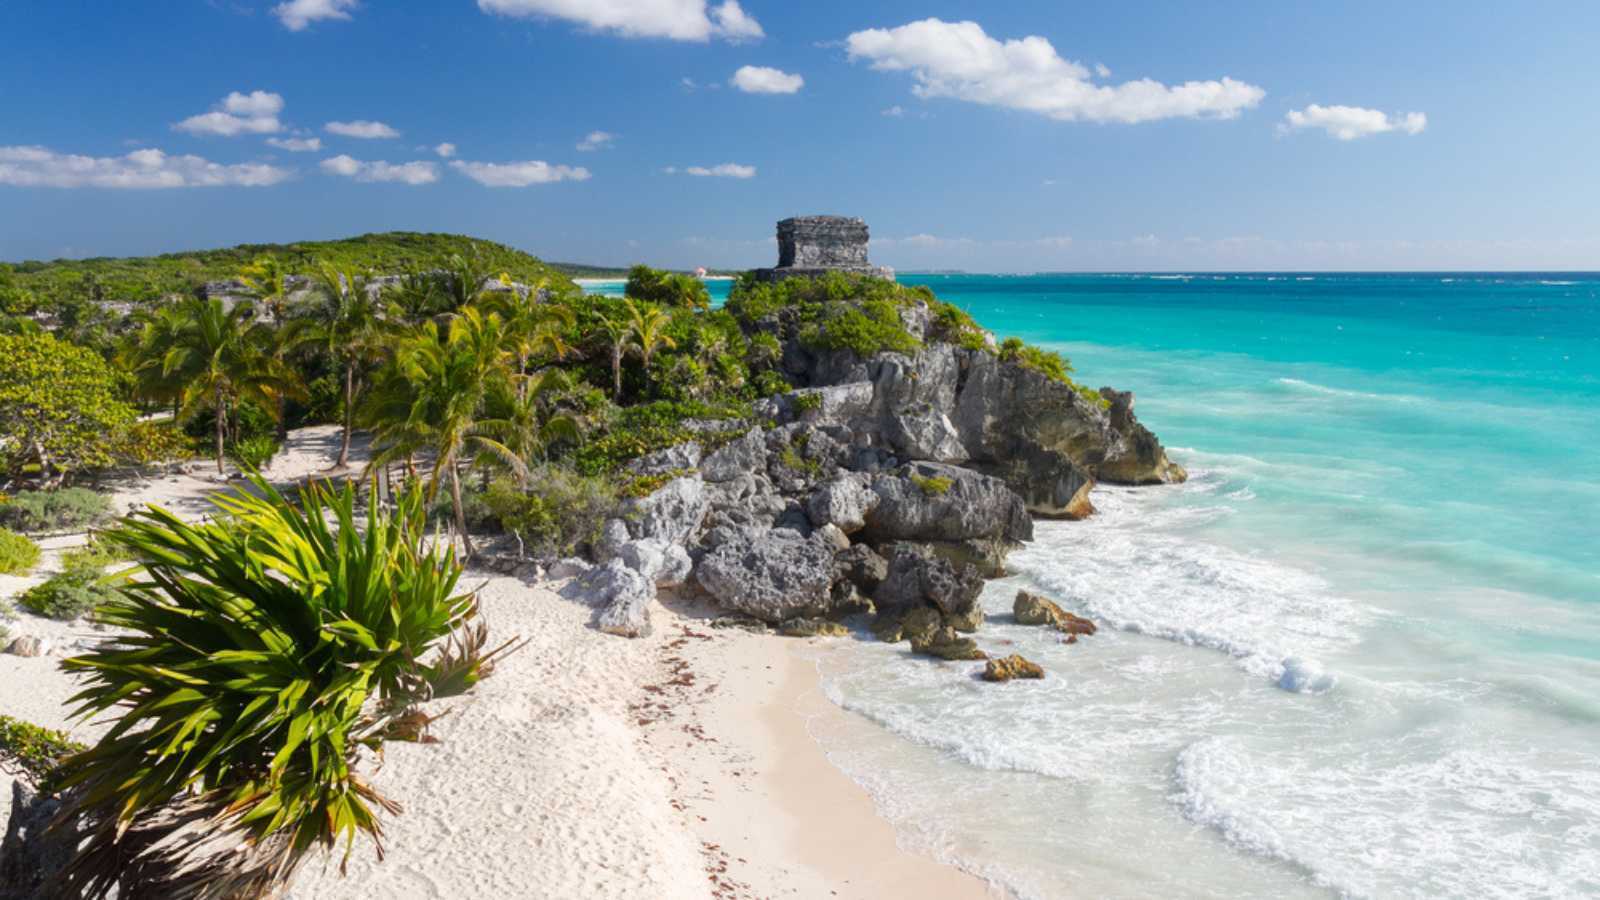 <p>Although Cancun has much to offer visitors, nearby towns like <a href="https://thehappinessfxn.com/best-all-inclusive-resorts-near-playa-del-carmen/">Playa del Carman</a> and Tulum are equally exciting and worth the trip. Playa del Carmen, a little over an hour south along the coast, is home to Xel-Há, a natural aquarium full of fish, turtles, and dolphins. You can also take a guided tour of Río Secreto and explore the underground river and connected caves full of stalagmites and stalactites. </p><p>Tulum, about two hours south of Cancun, is known for the <a href="https://tulumruins.net/" rel="nofollow noopener">Tulum Archaeological Site</a> and its restored temples and castles along the coast of the Yucatan Peninsula.</p><p>You can also explore the Punta Laguna Nature Reserve, home to jaguars, pumas, and howler monkeys.</p><p>These places offers a mixture of luxury resorts, ancient Mayan ruins, and outdoor activities to impress any traveler to the area. </p>